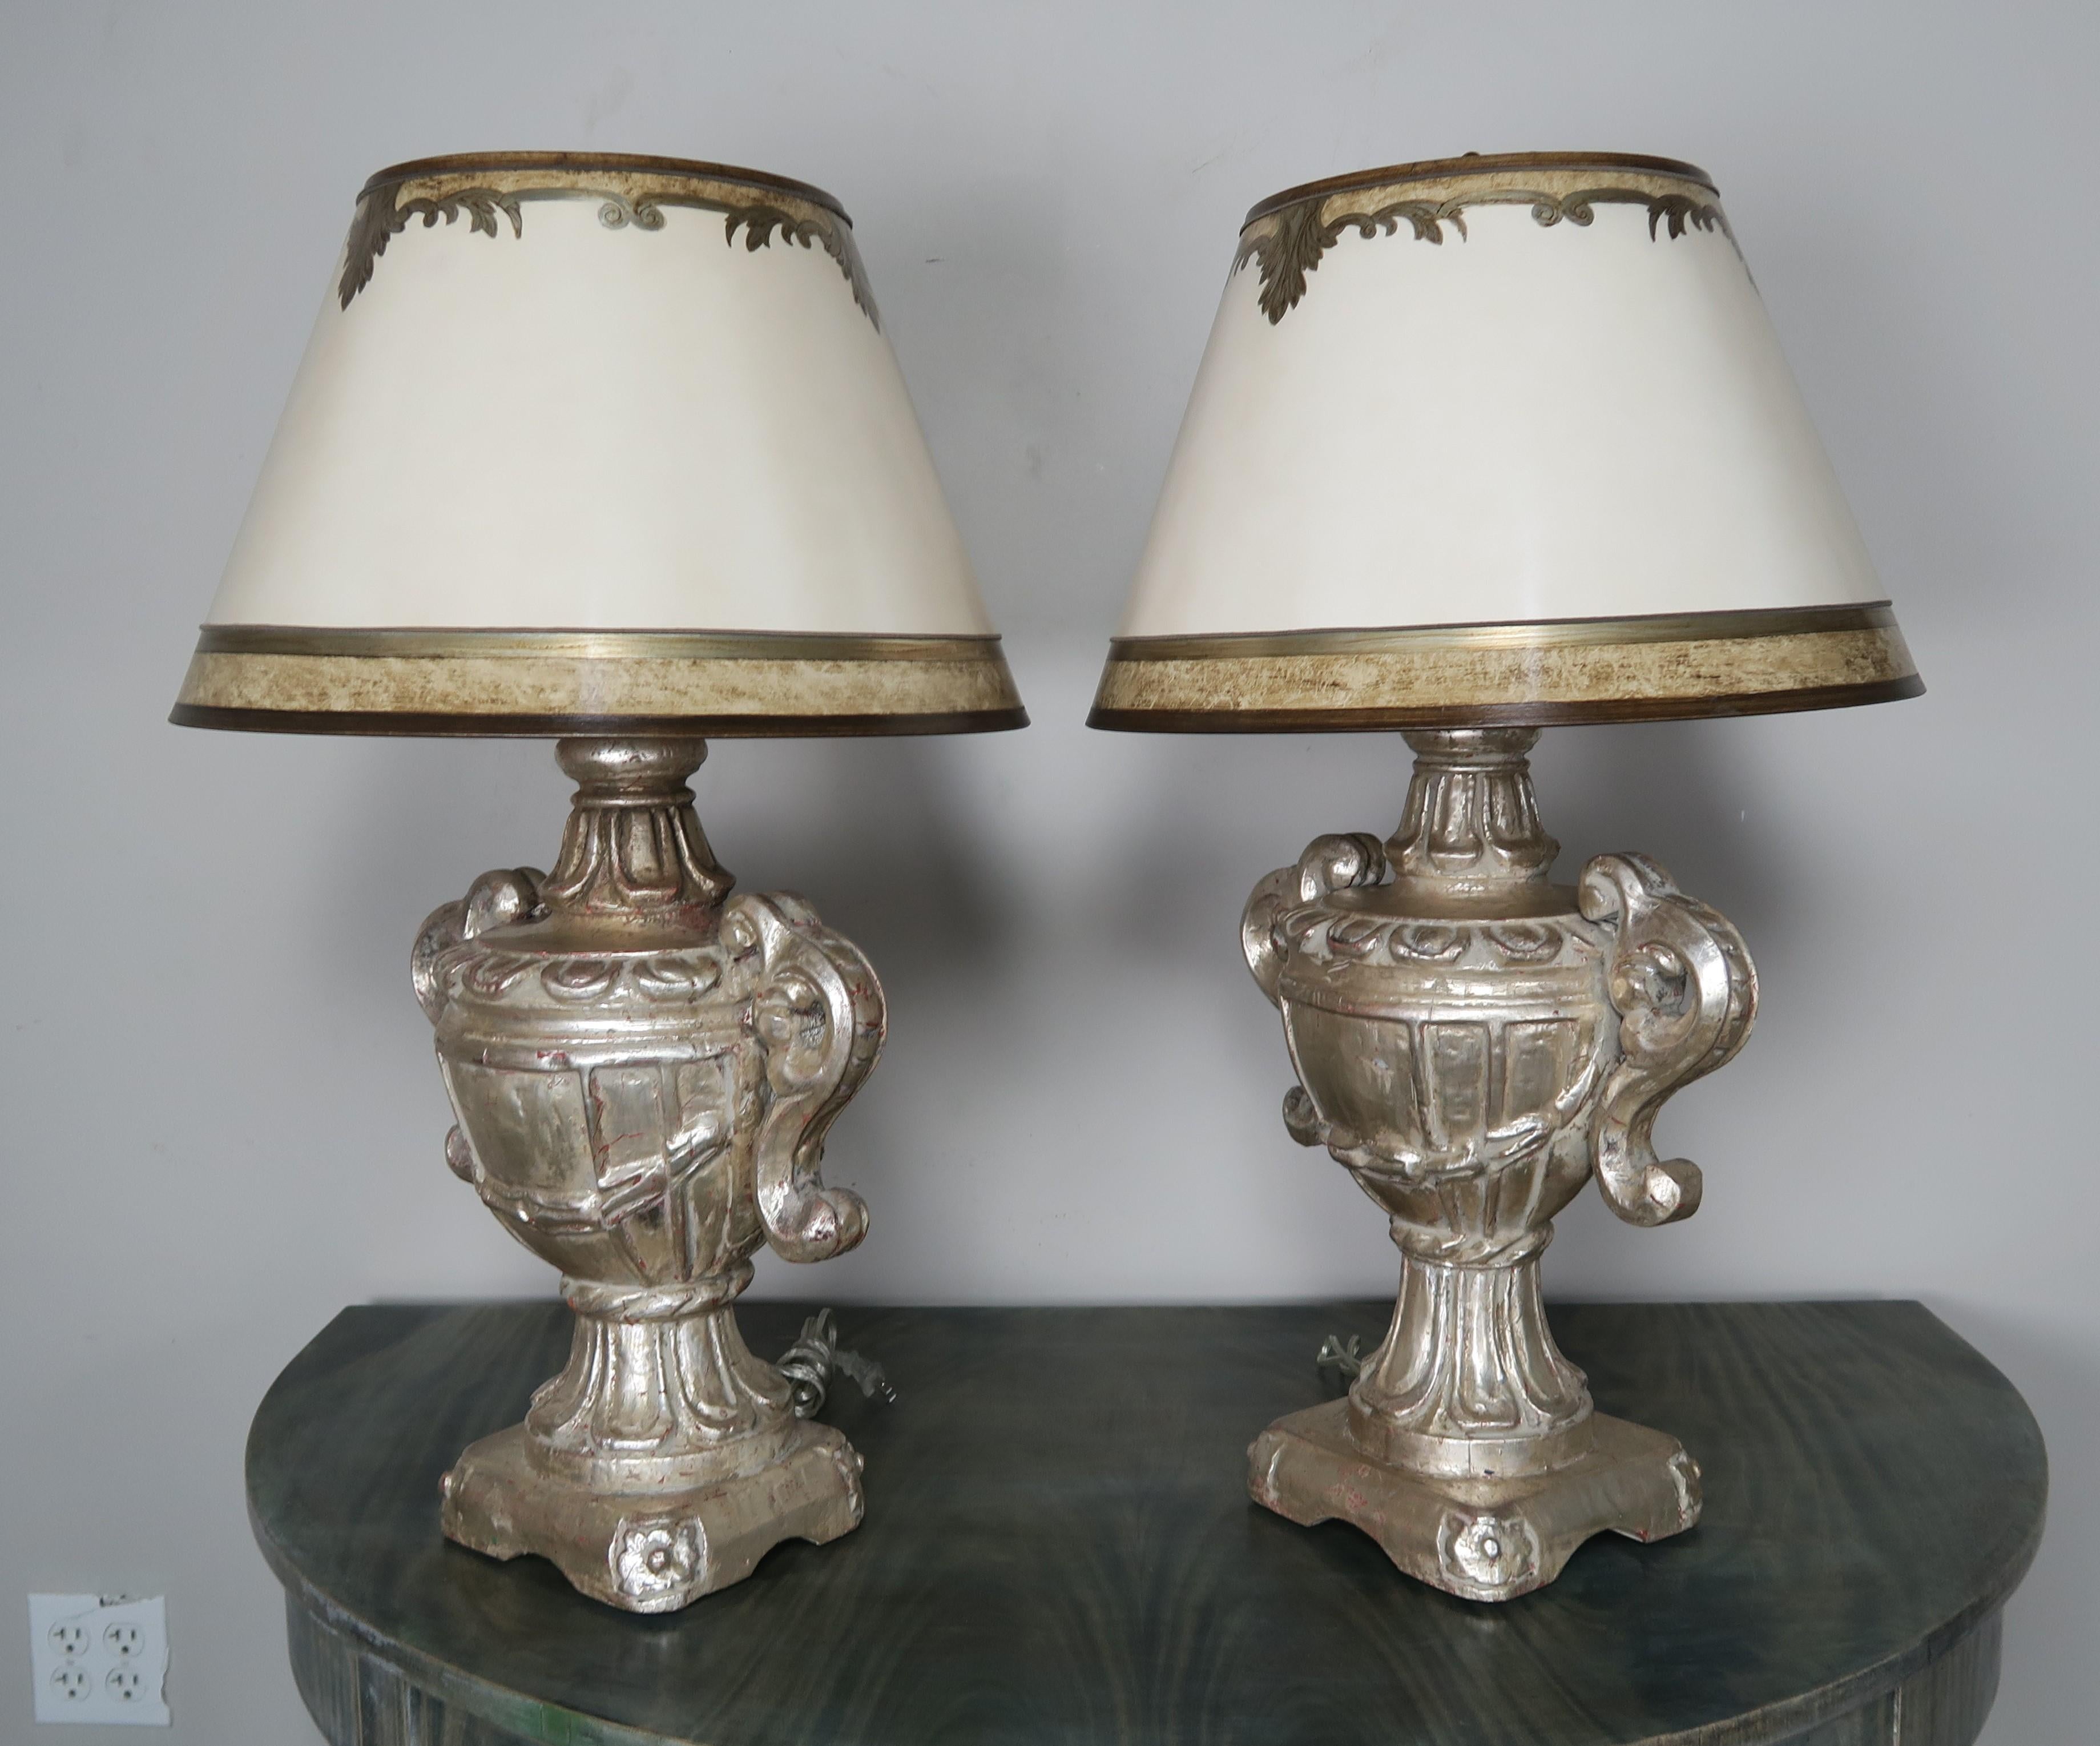 Contemporary Italian Carved Silvered Lamps with Parchment Shades, a Pair